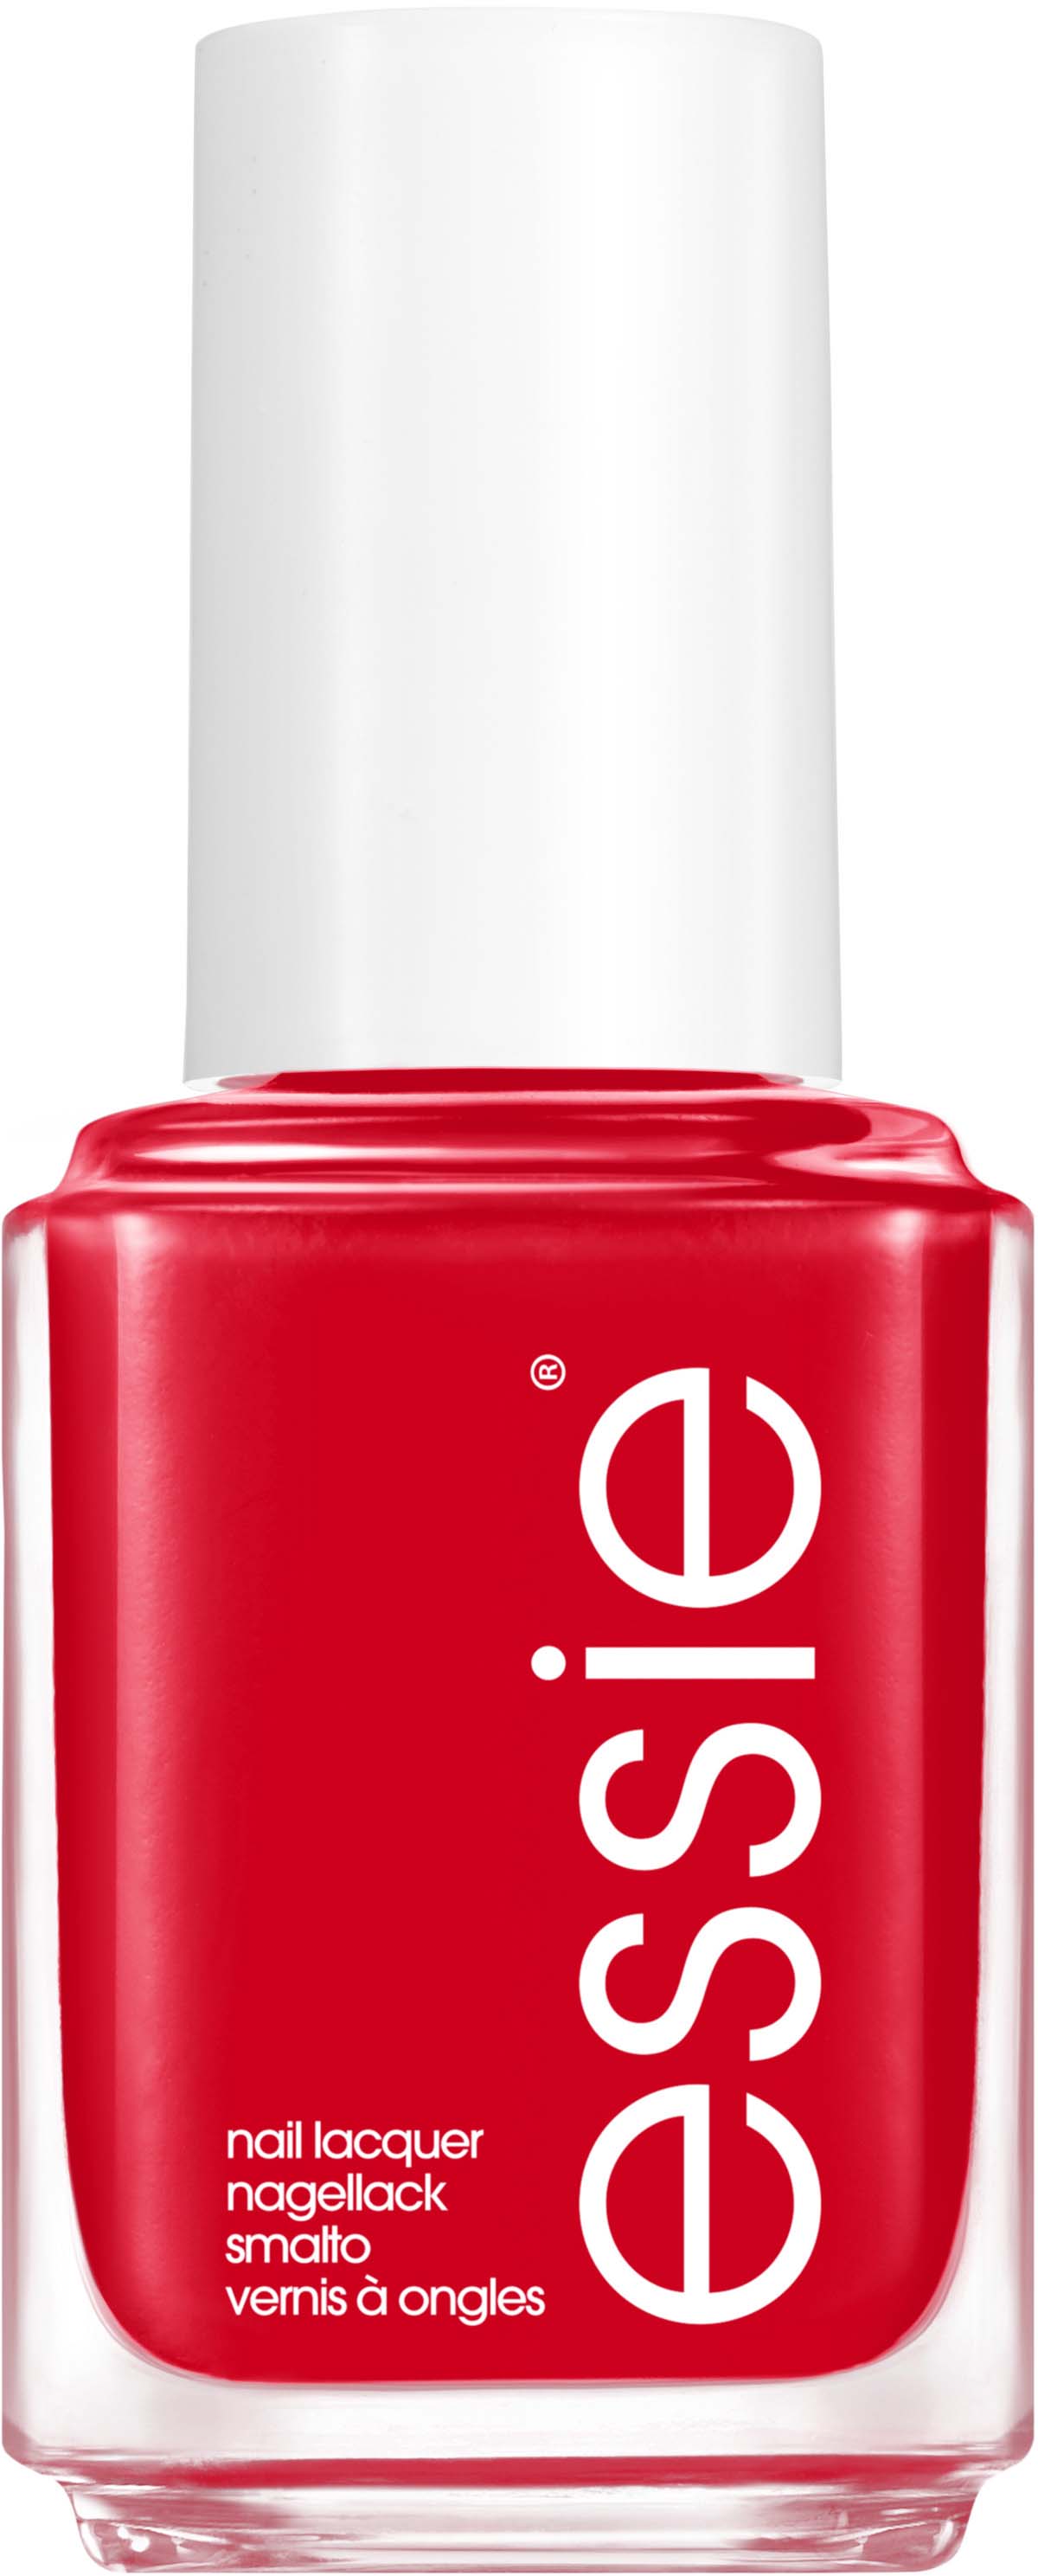 61 Roulette Russian Lacquer Nail Essie